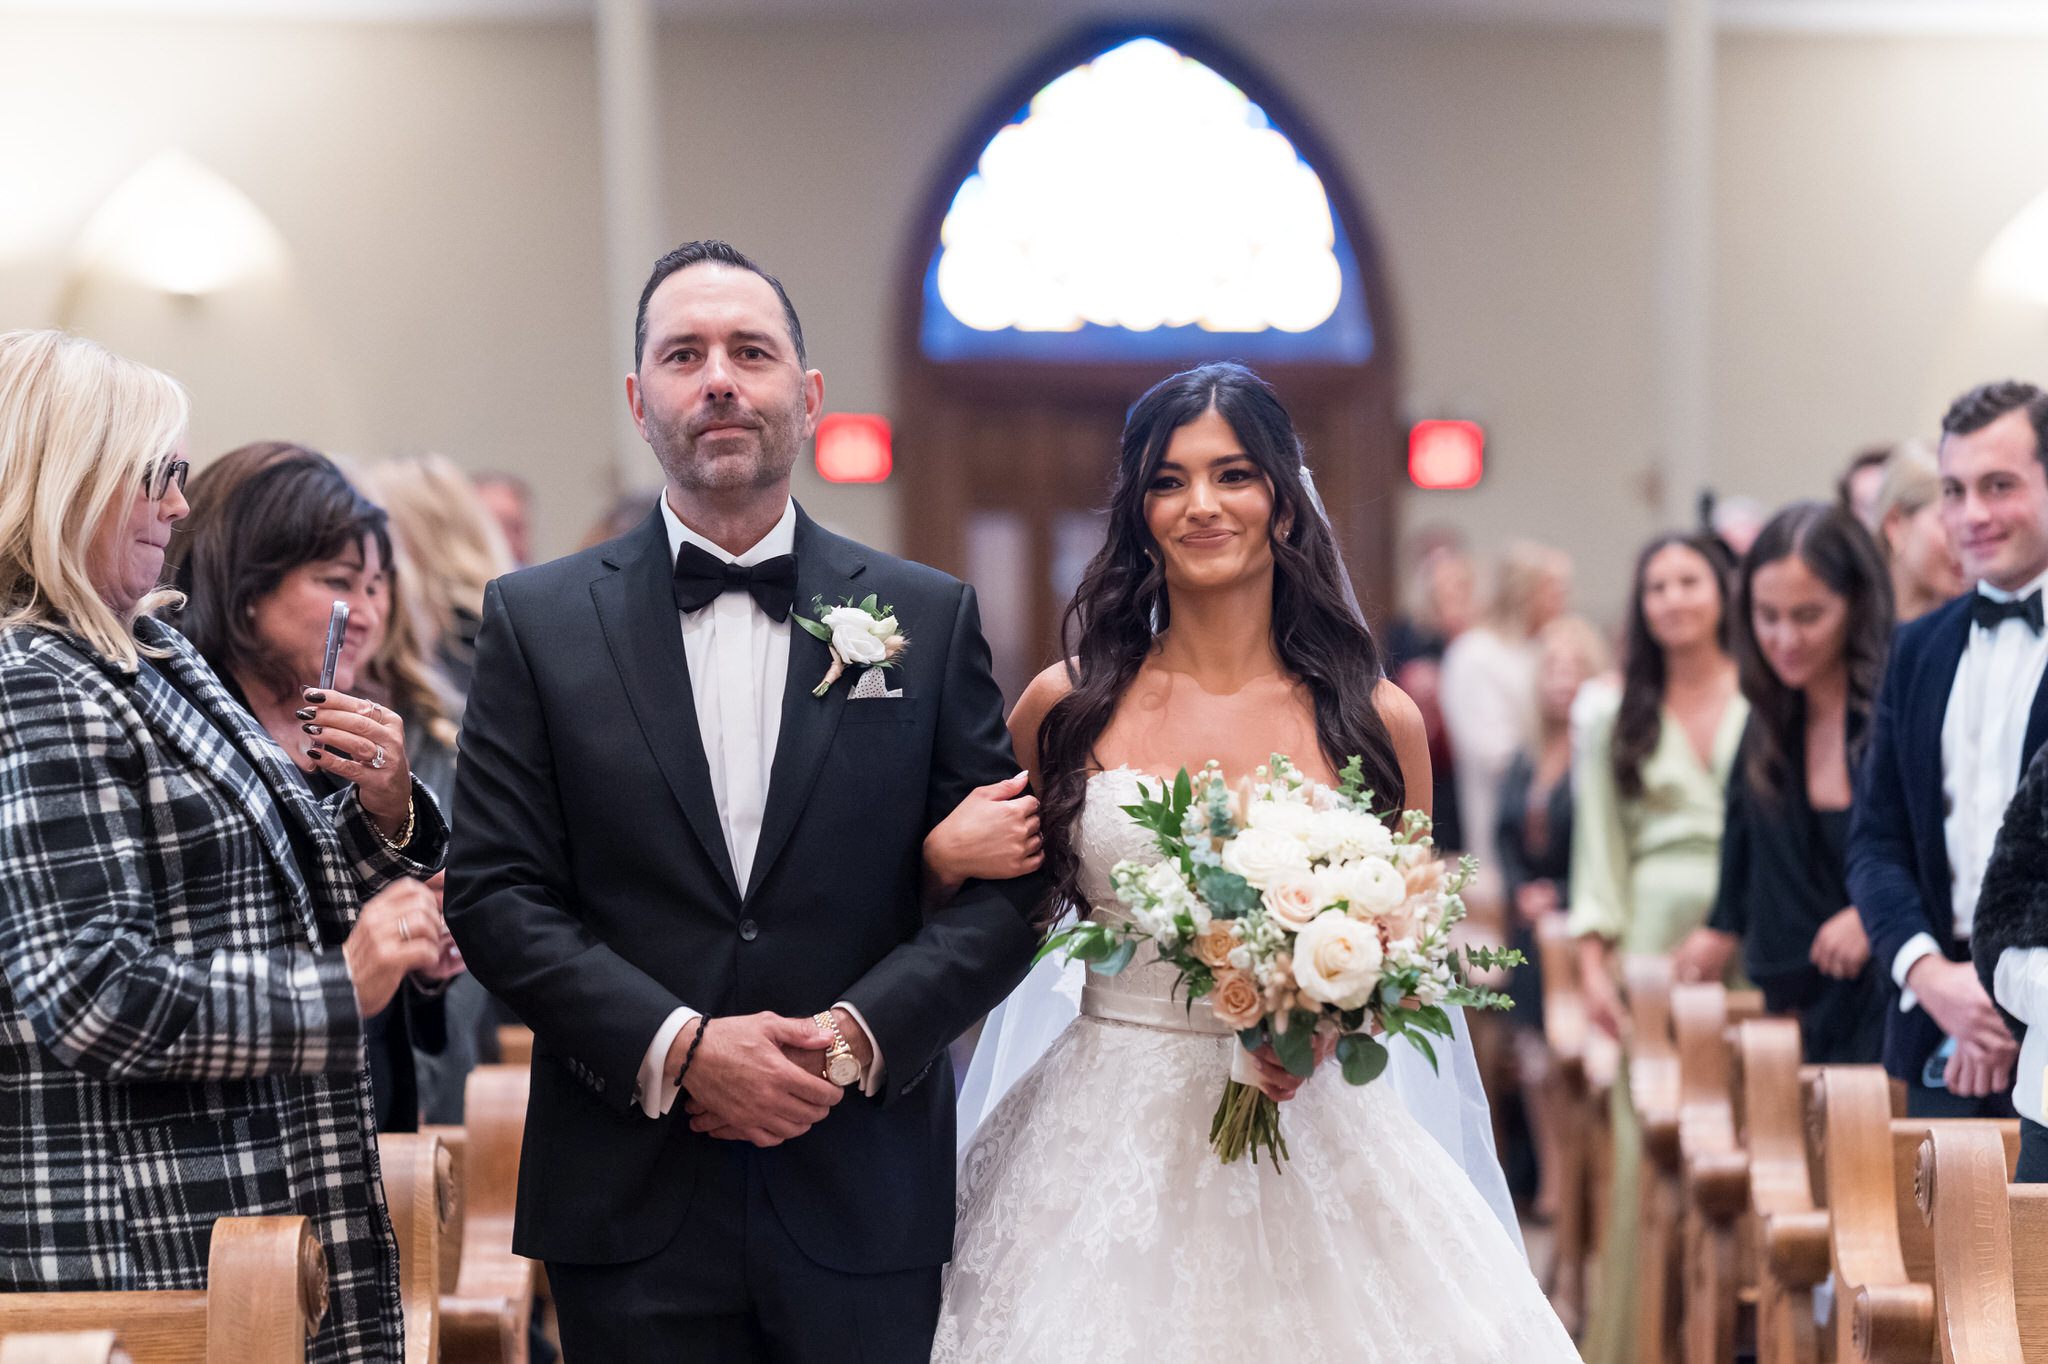 The bride walks down the aisle at St. Francis Xavier on her wedding day in downtown Petoskey.  